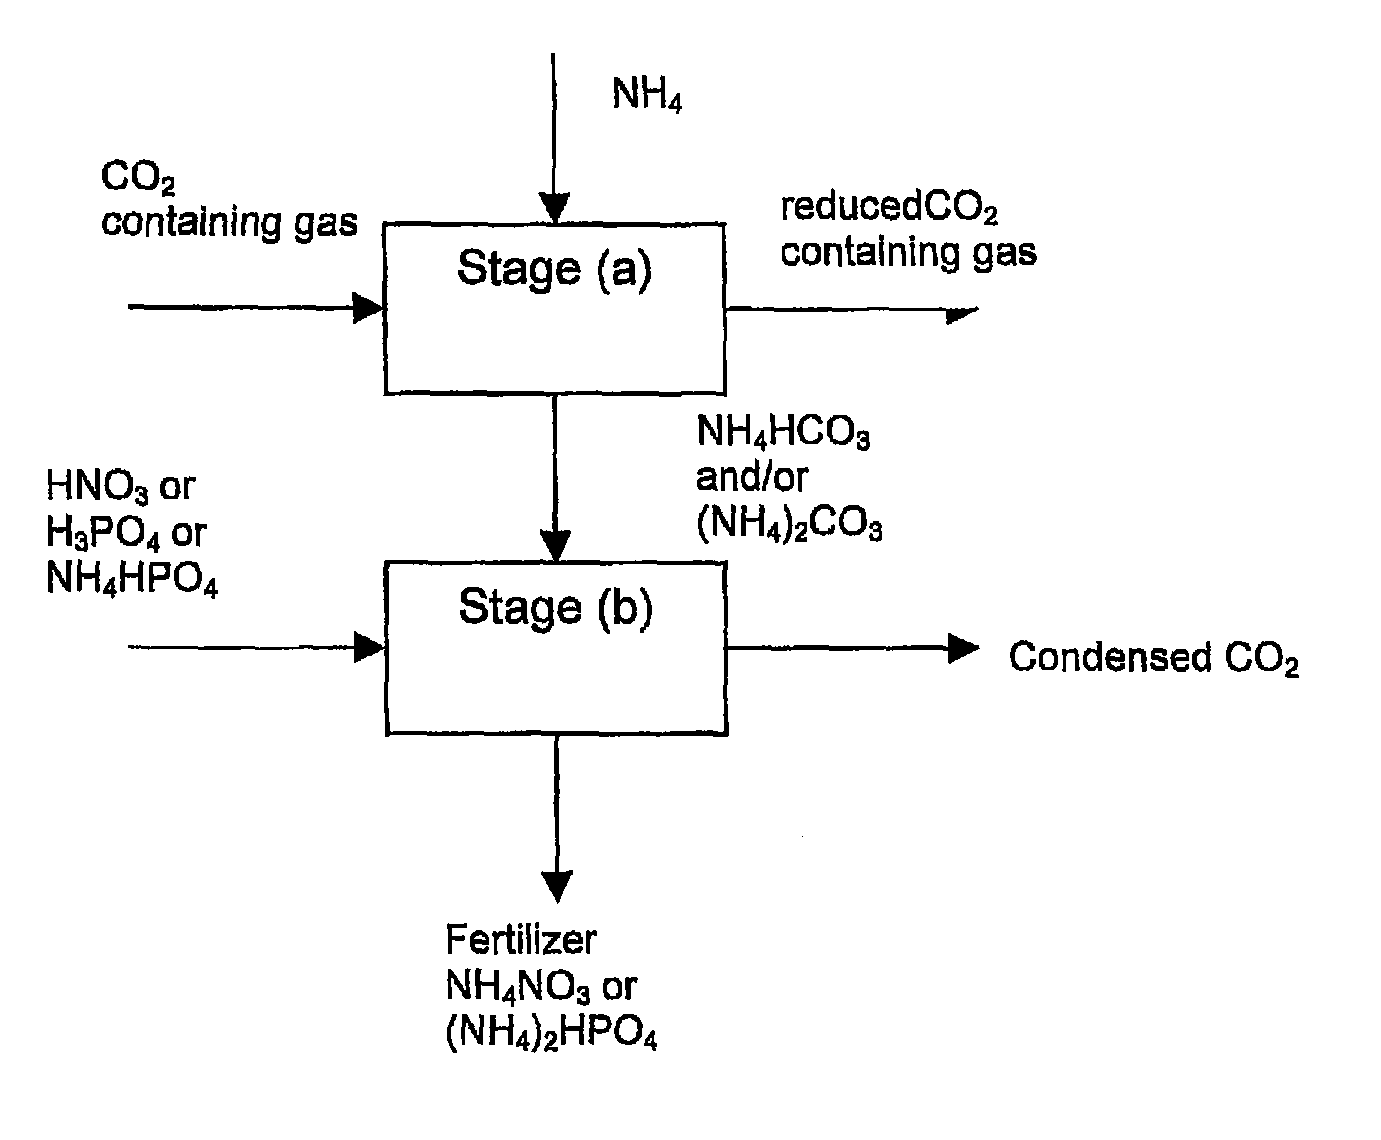 Method For the Production of Fertilizer and CO2